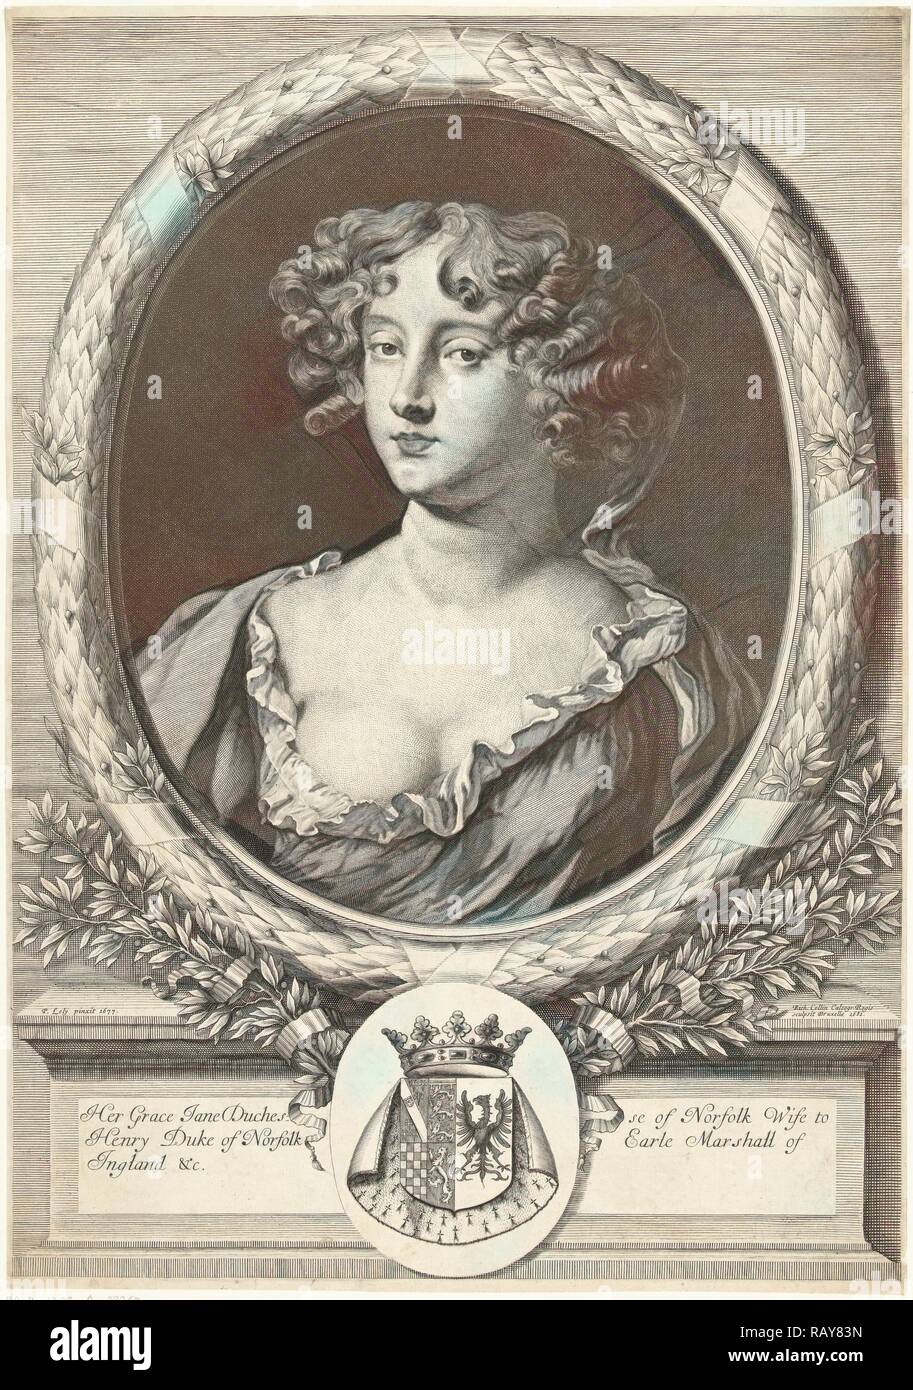 Portrait of Jane Bickerton Duchess of Norfolk, Richard Collin, 1681. Reimagined by Gibon. Classic art with a modern reimagined Stock Photo